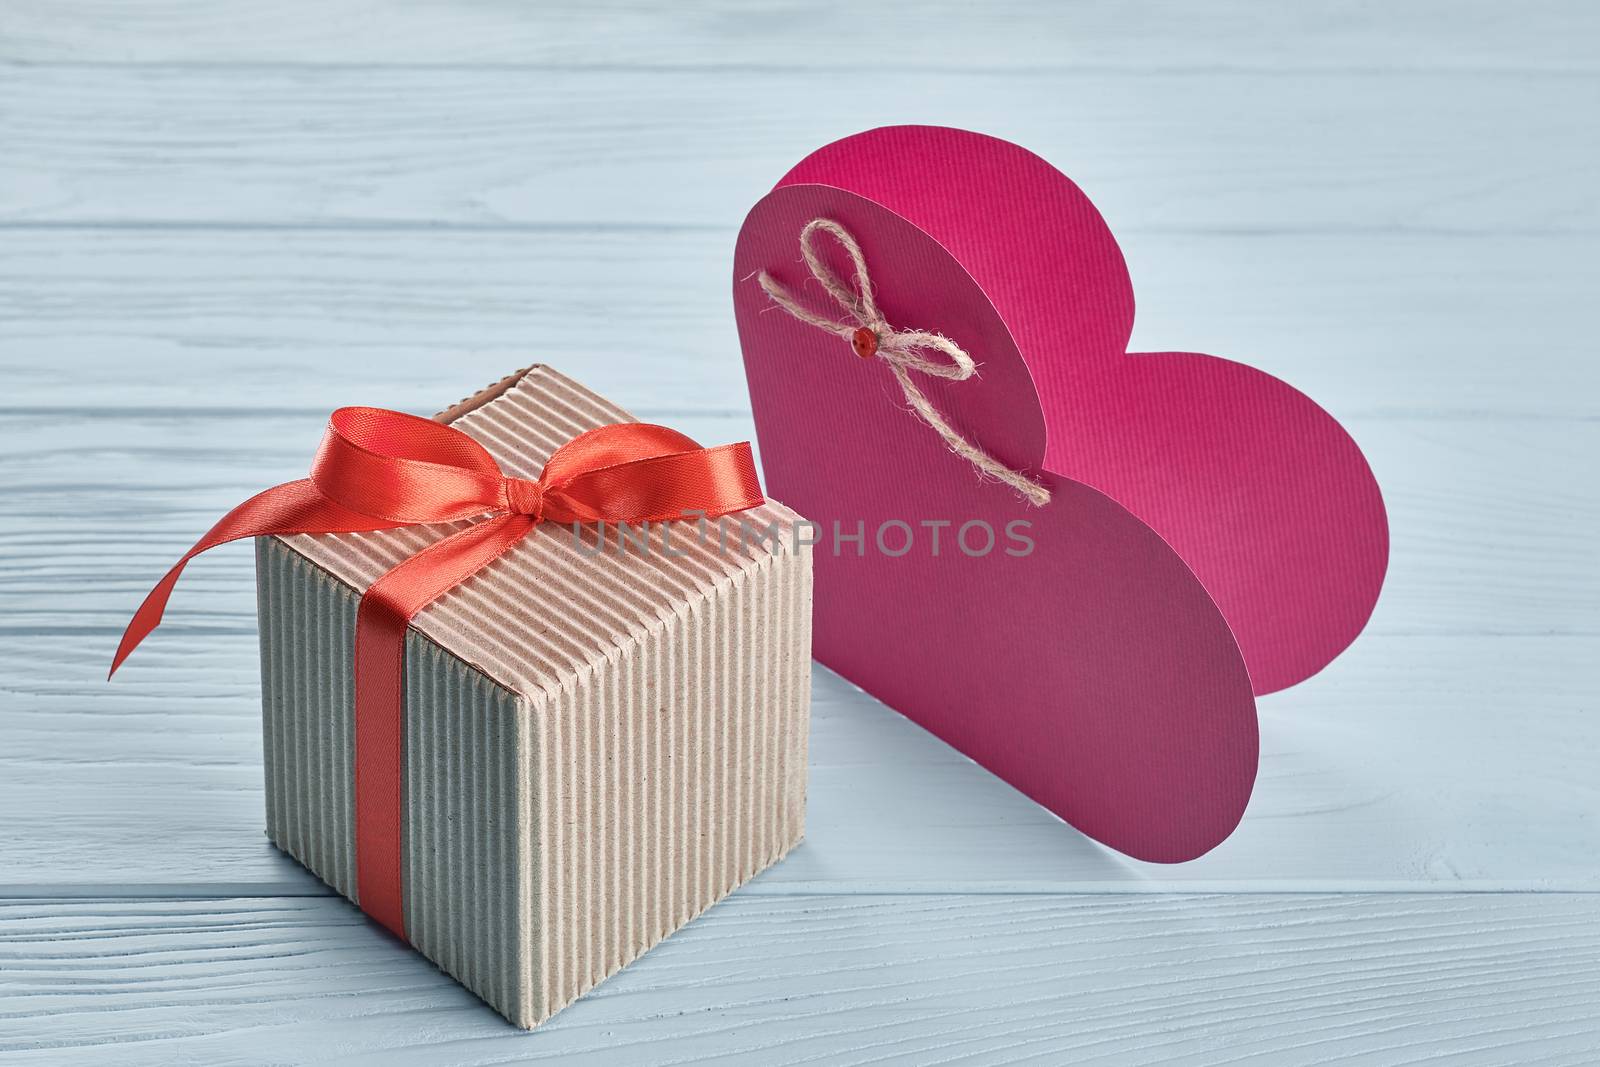 Valentines Day. Love heart, gift box, red ribbon handmade  paper card. Vintage retro romantic style. Marriage proposal concept. Unusual creative greeting card, wooden blue background, copyspace, toned